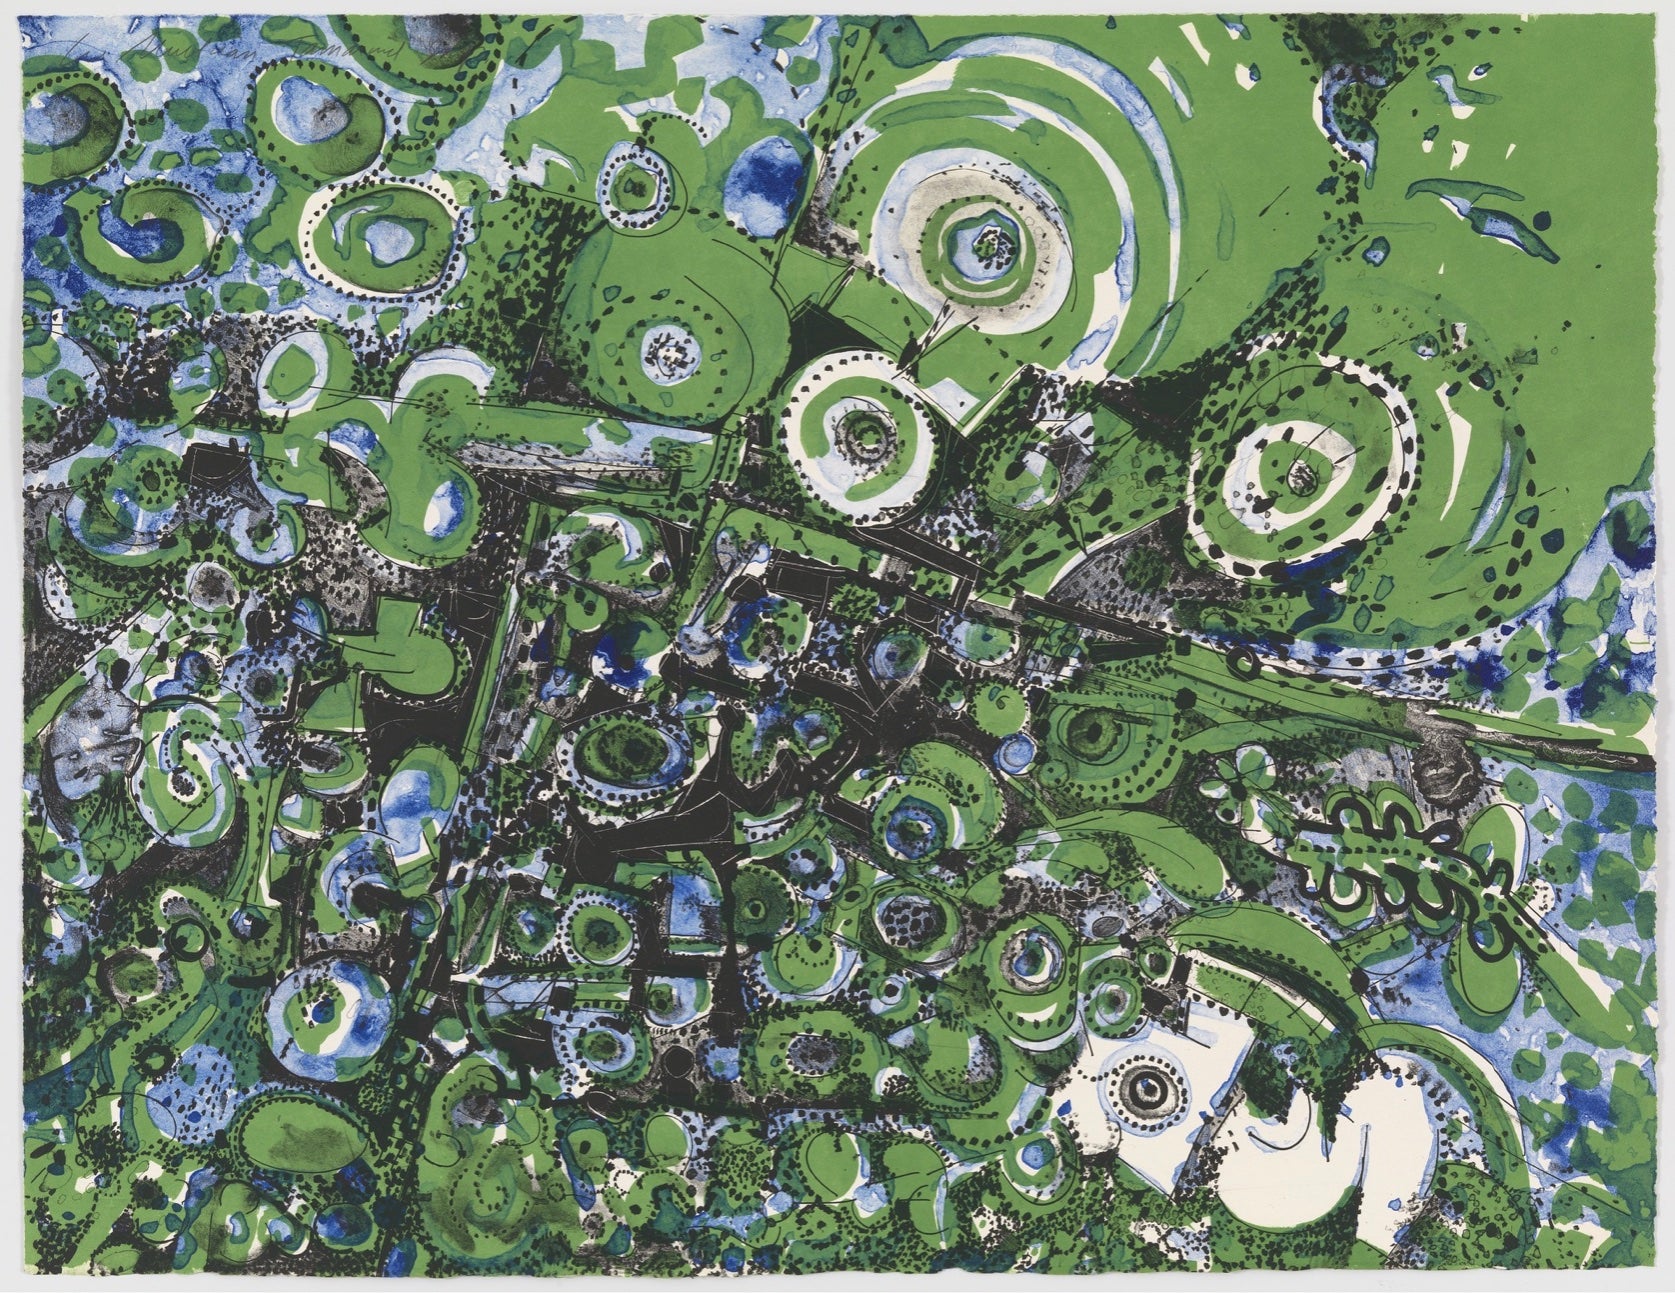 TOWARD THE UNKNOWN | LEE MULLICAN